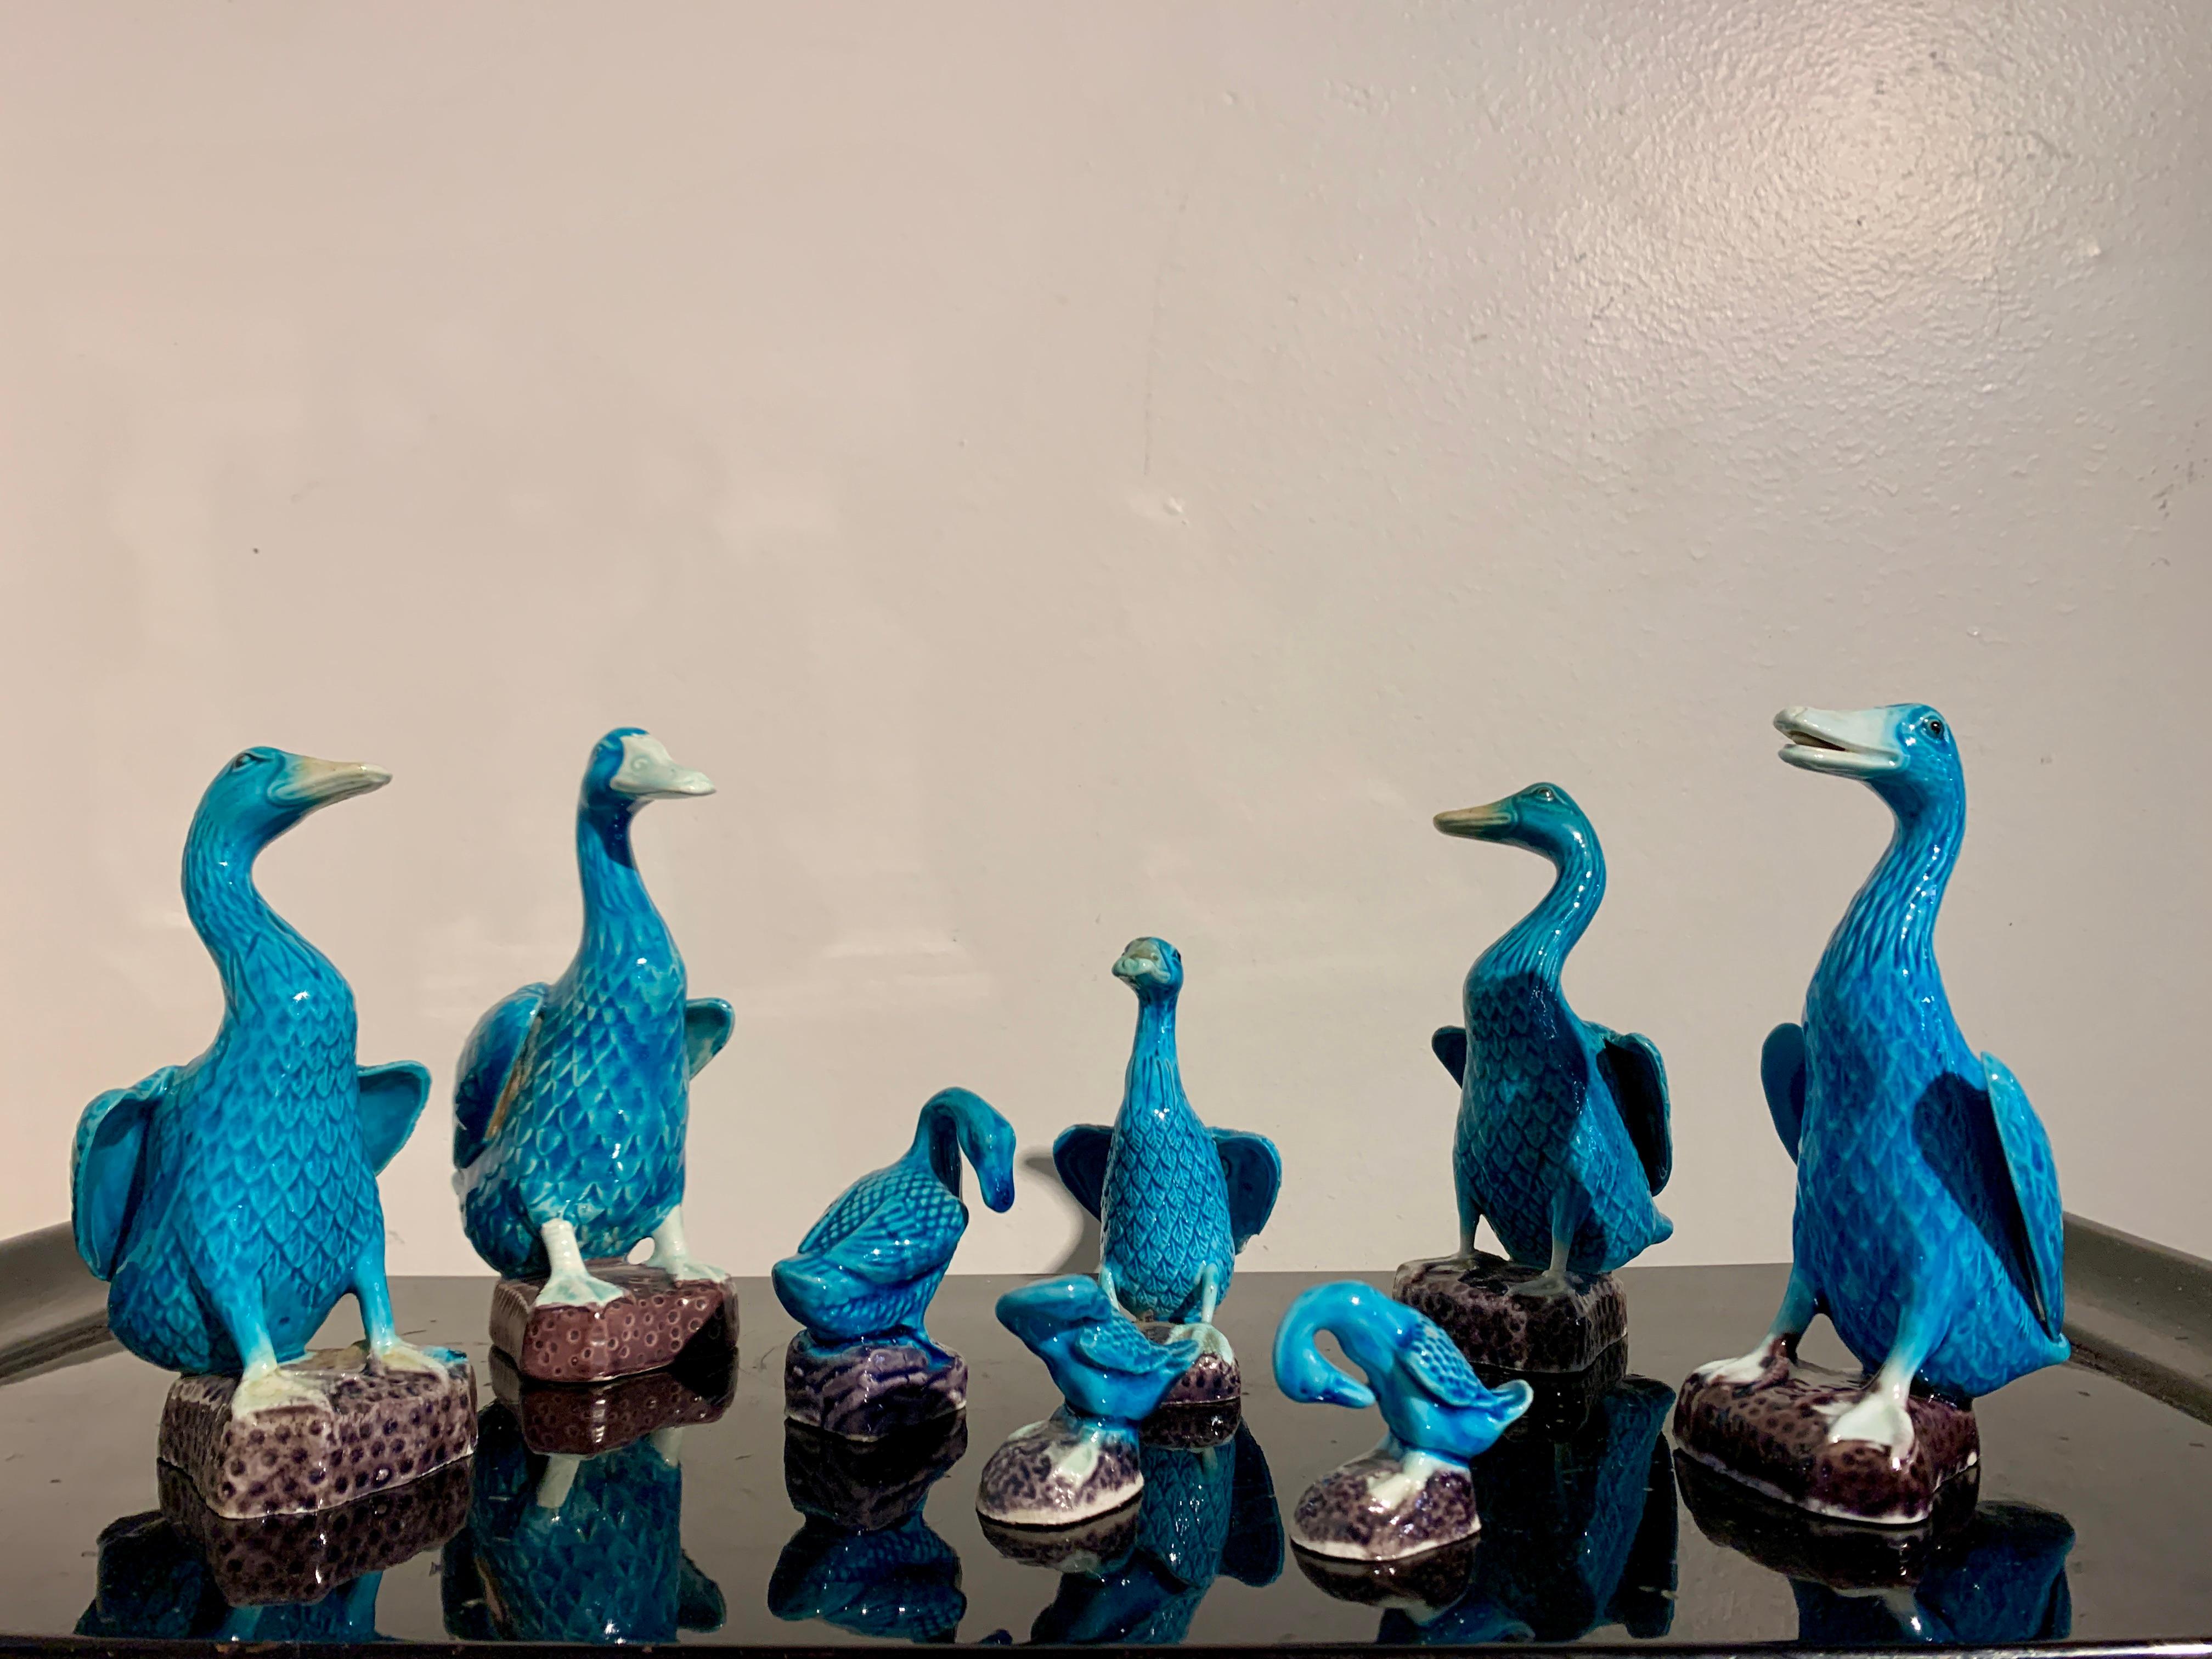 An absolutely delightful flock of eight vintage Chinese export turquoise glazed porcelain ducks, circa 1970's, China and Hong Kong.

The flock consists of eight ducks of various sizes, including five of medium size, and three of smaller size. The